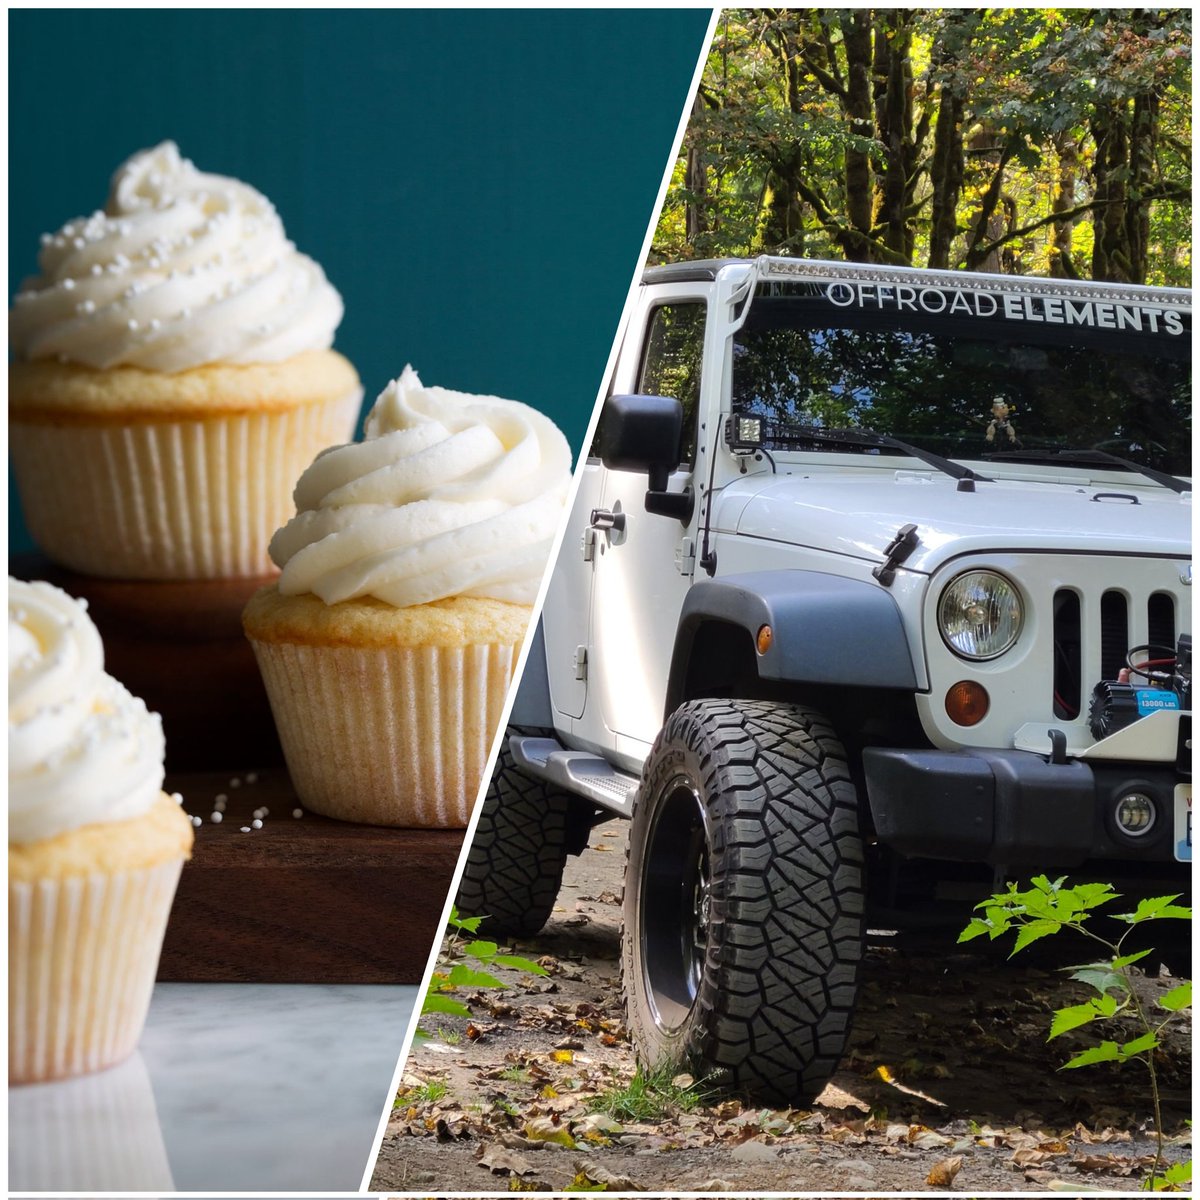 Good morning Mafia 👋😁 

It's #vanillacupcakeday 🧁 
You know what to do.. Let's see those sweet vanilla jeeps 📸👇